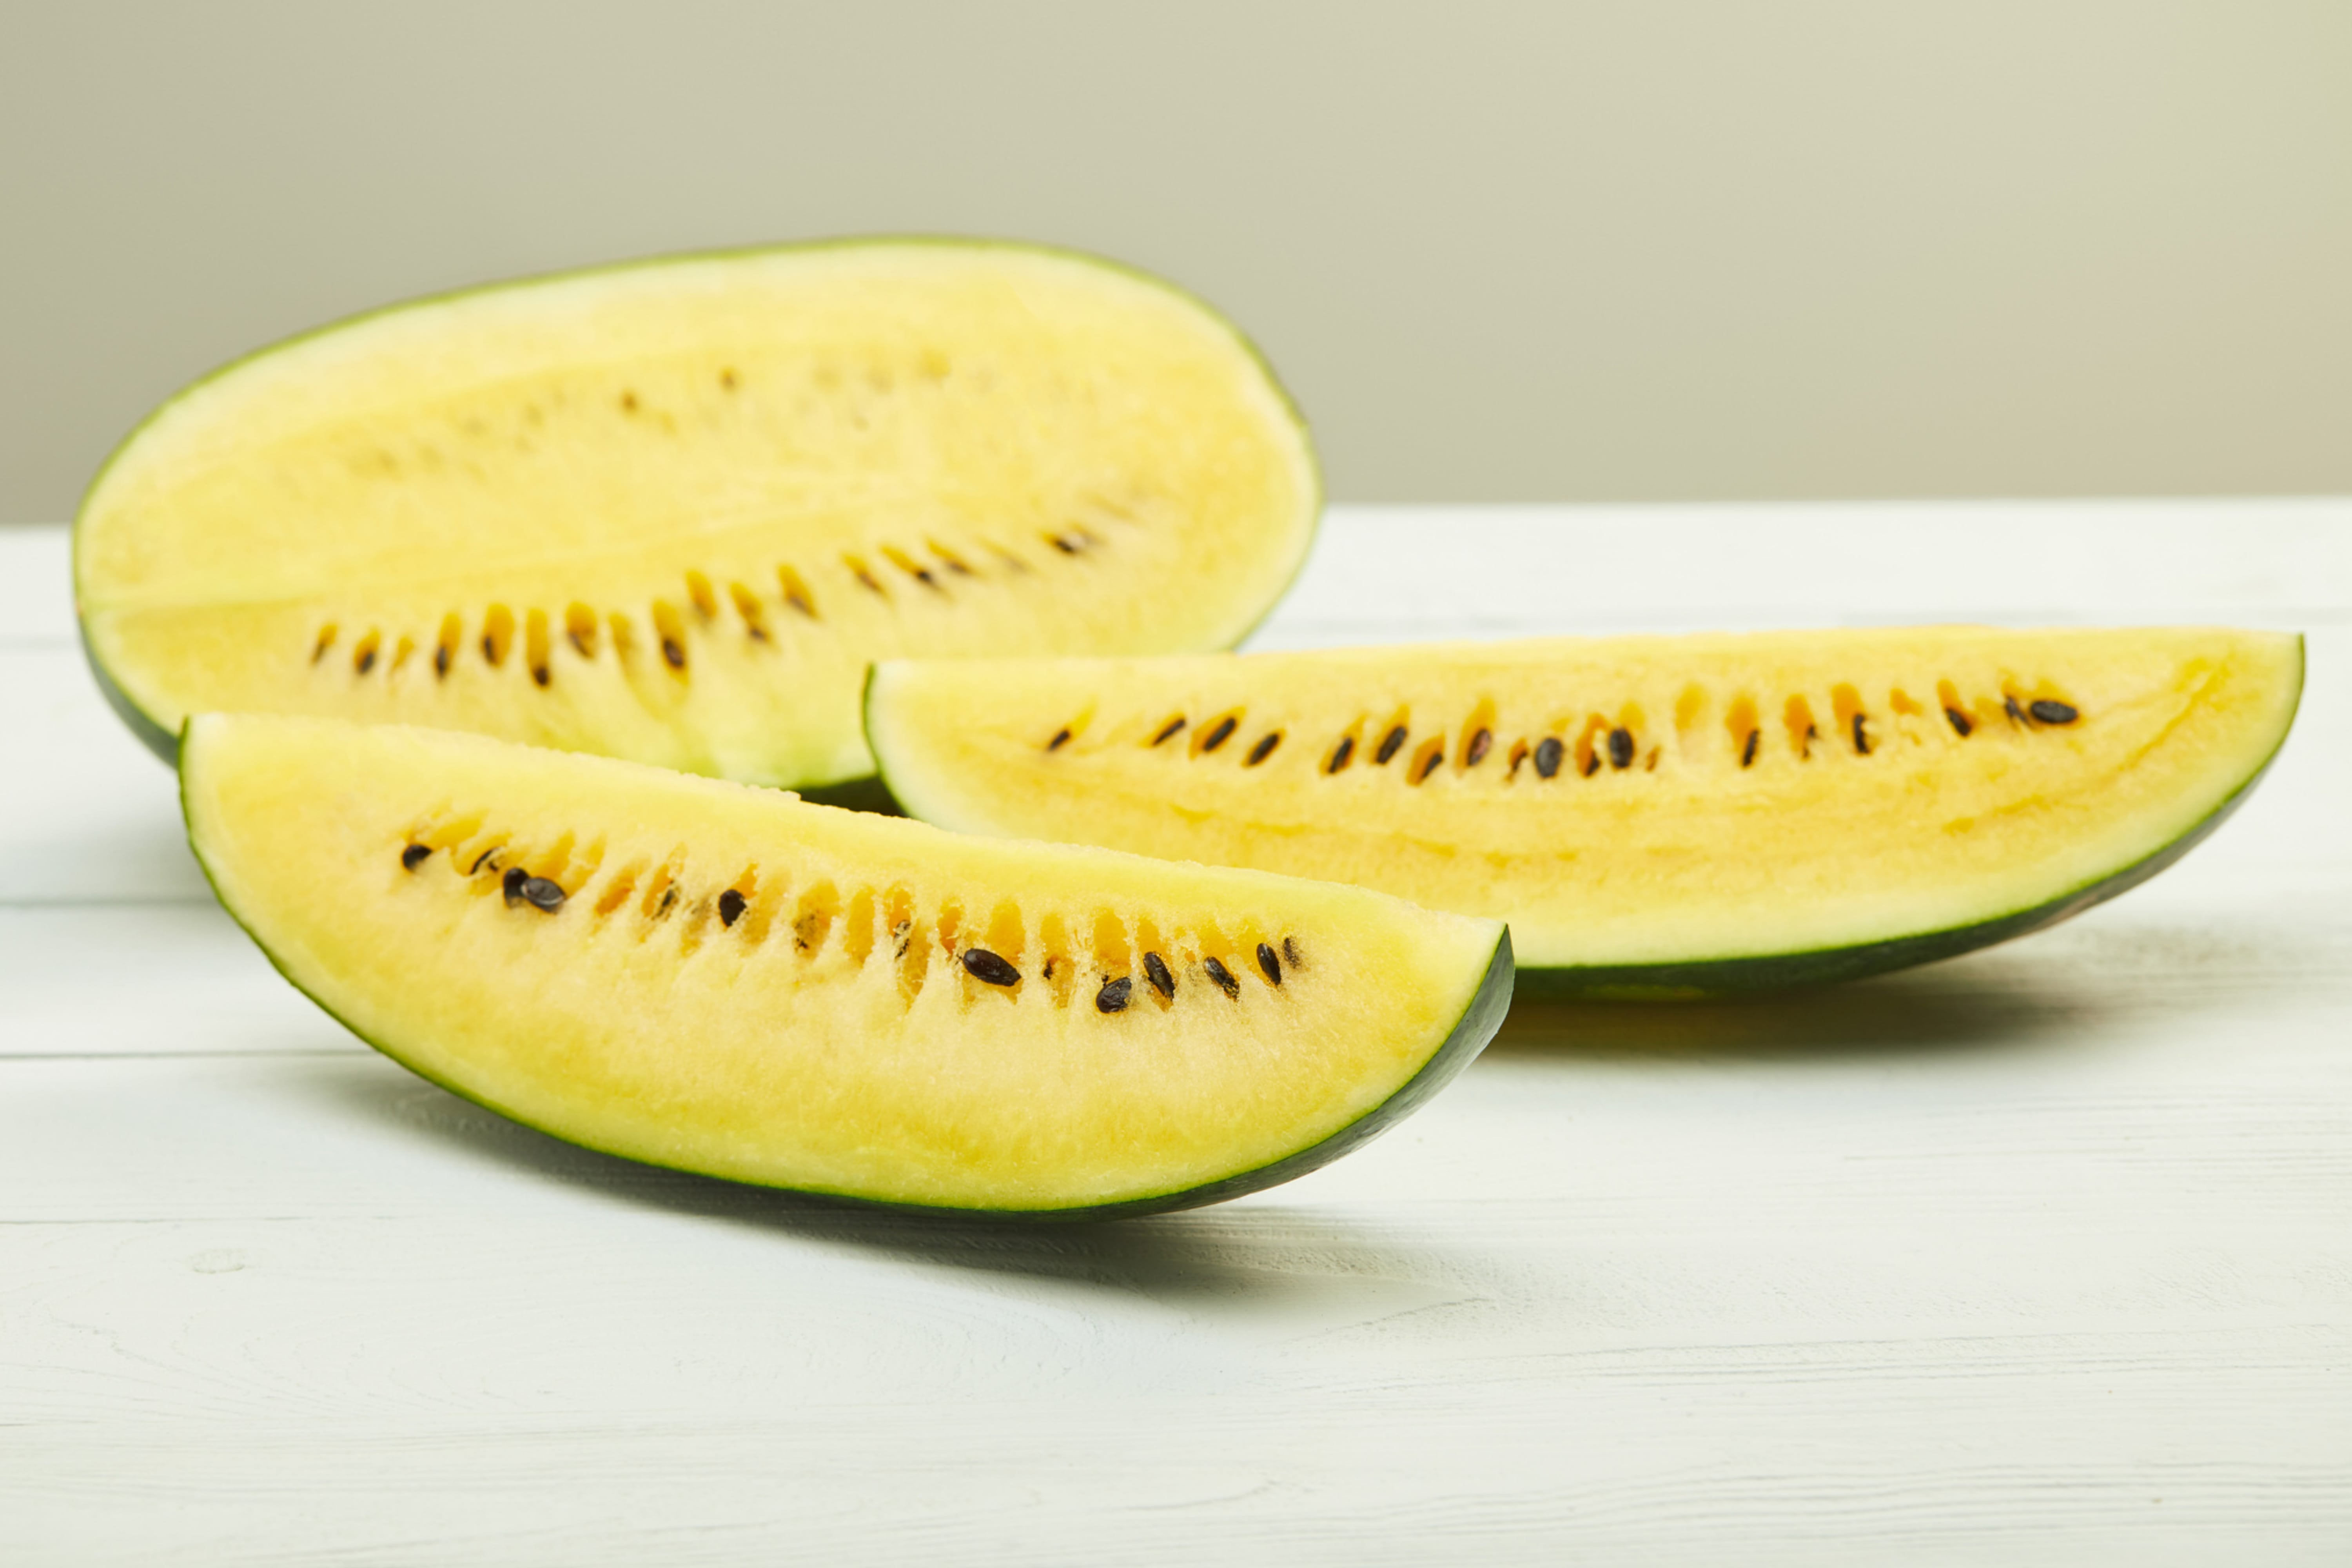 How to tell if yellow watermelon is bad